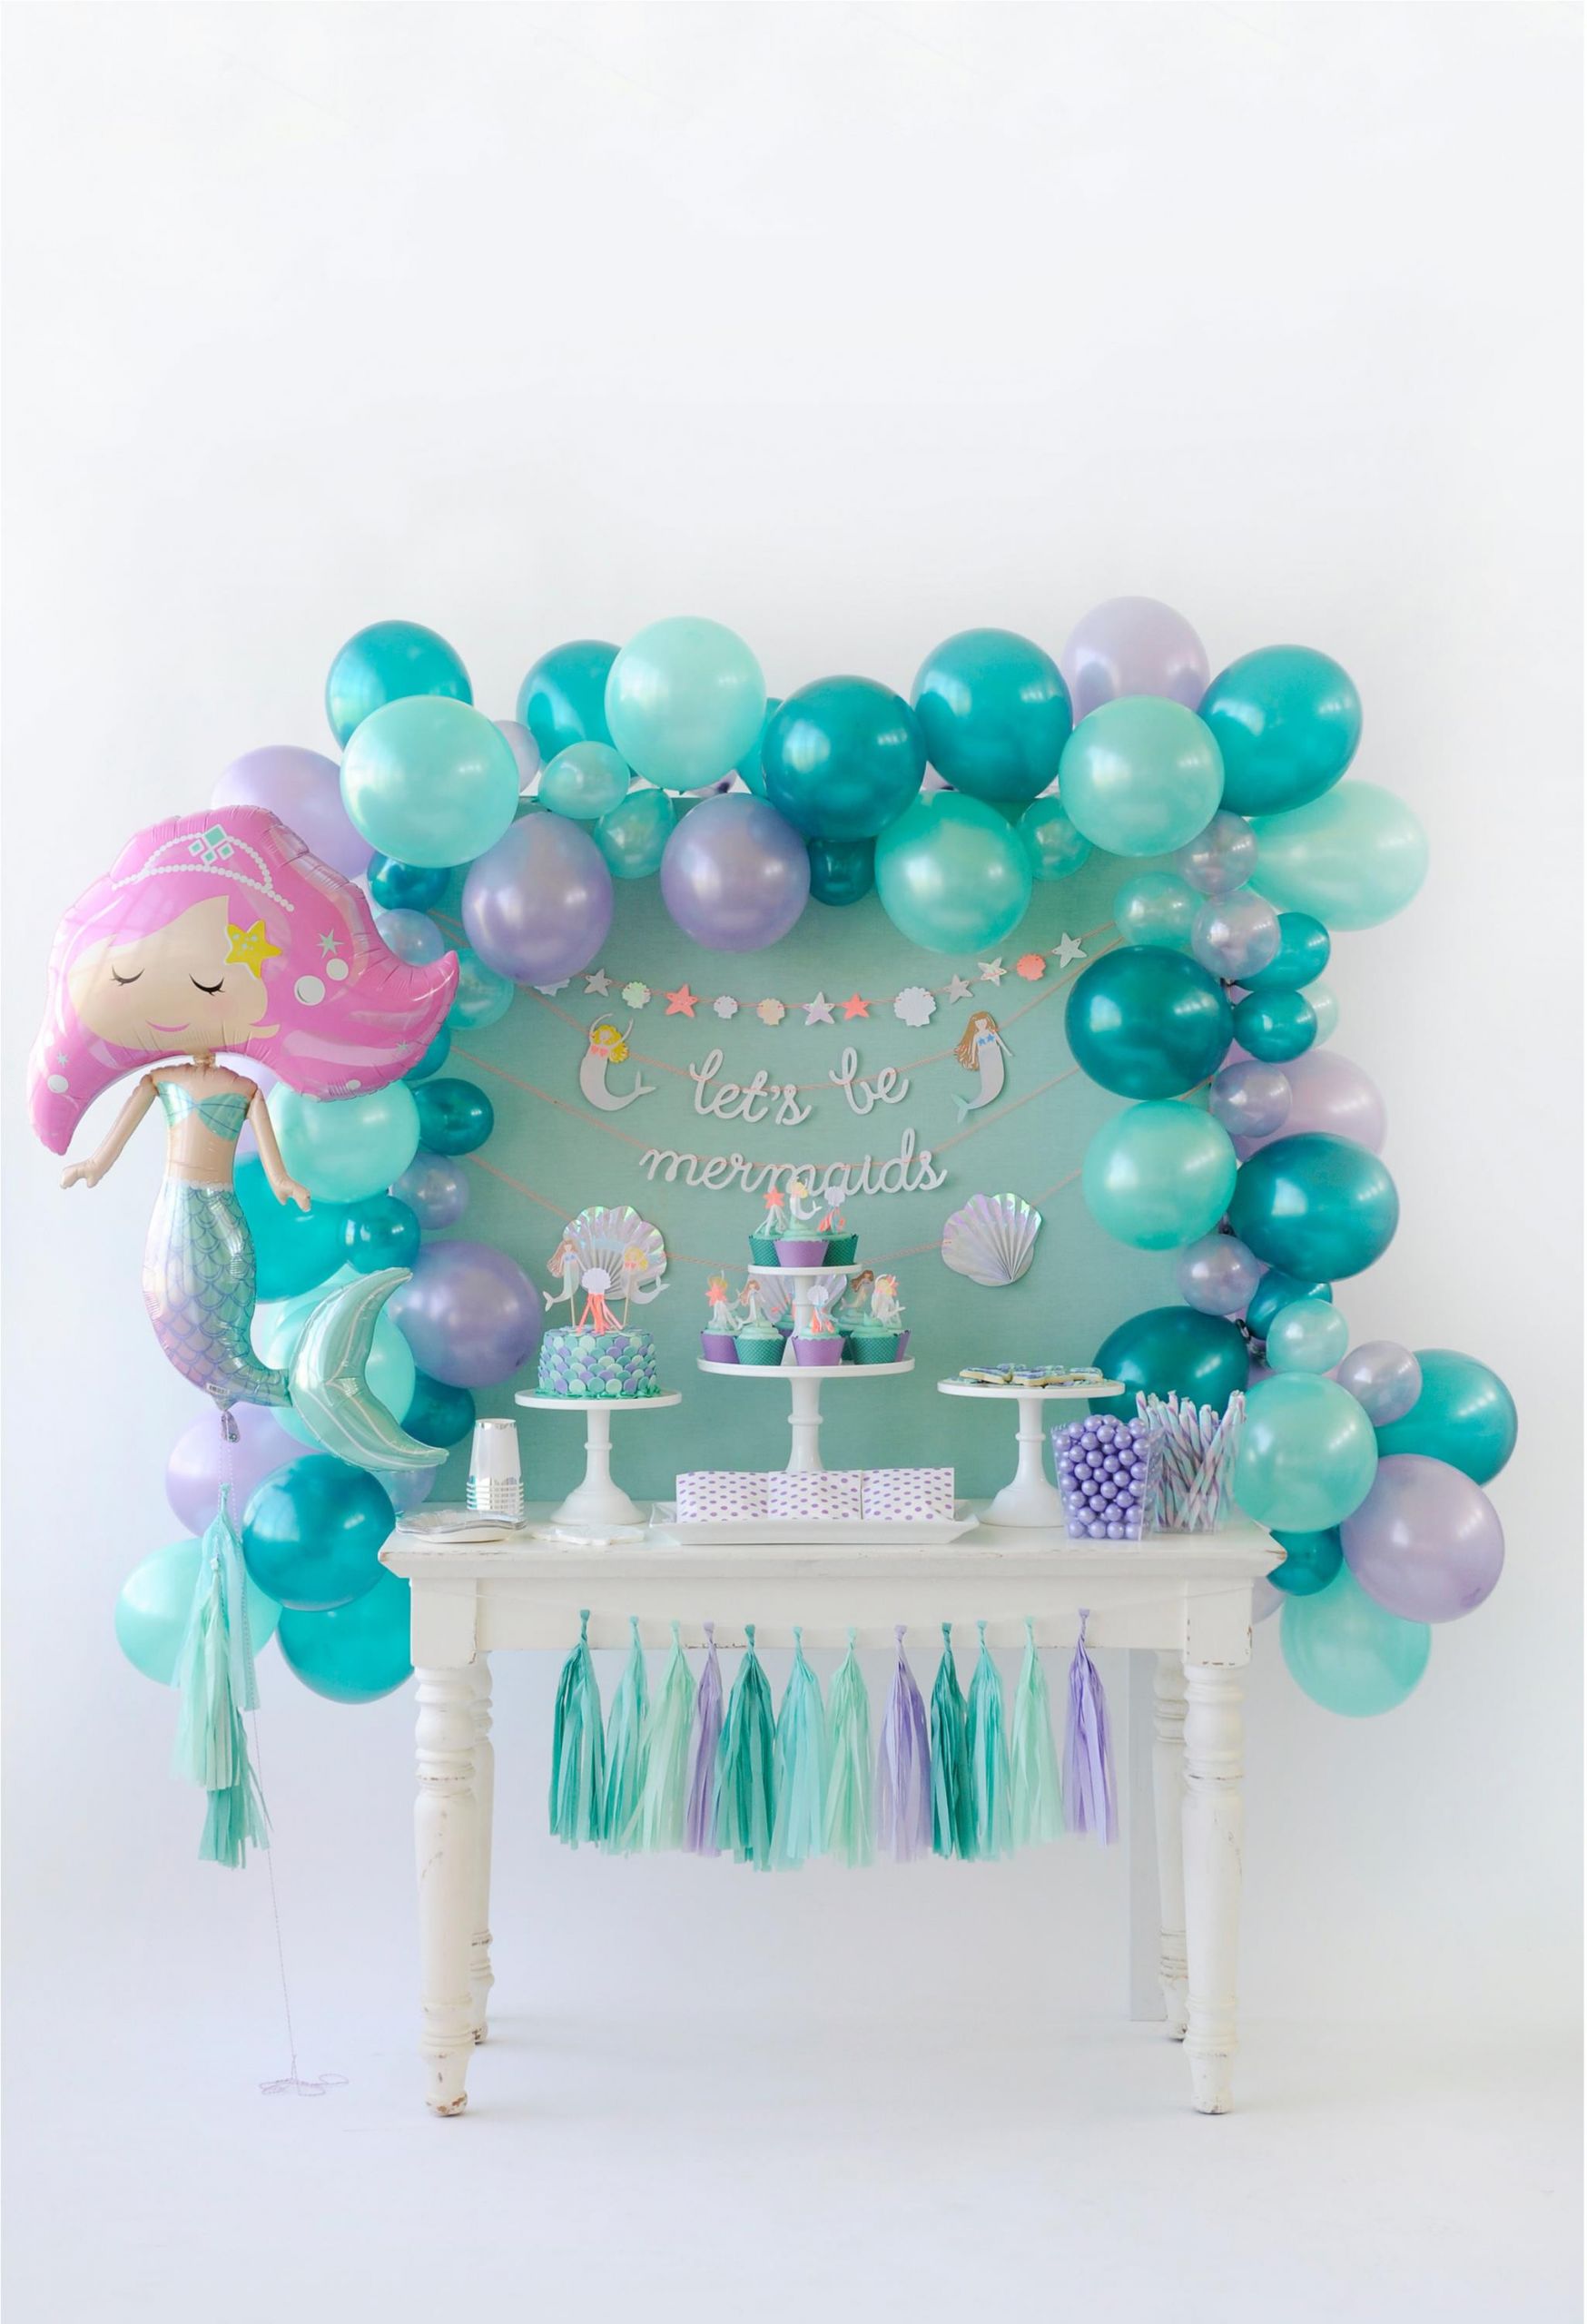 Mermaid Party Decoration Ideas
 Splash Over to this Adorable Mermaid Party Project